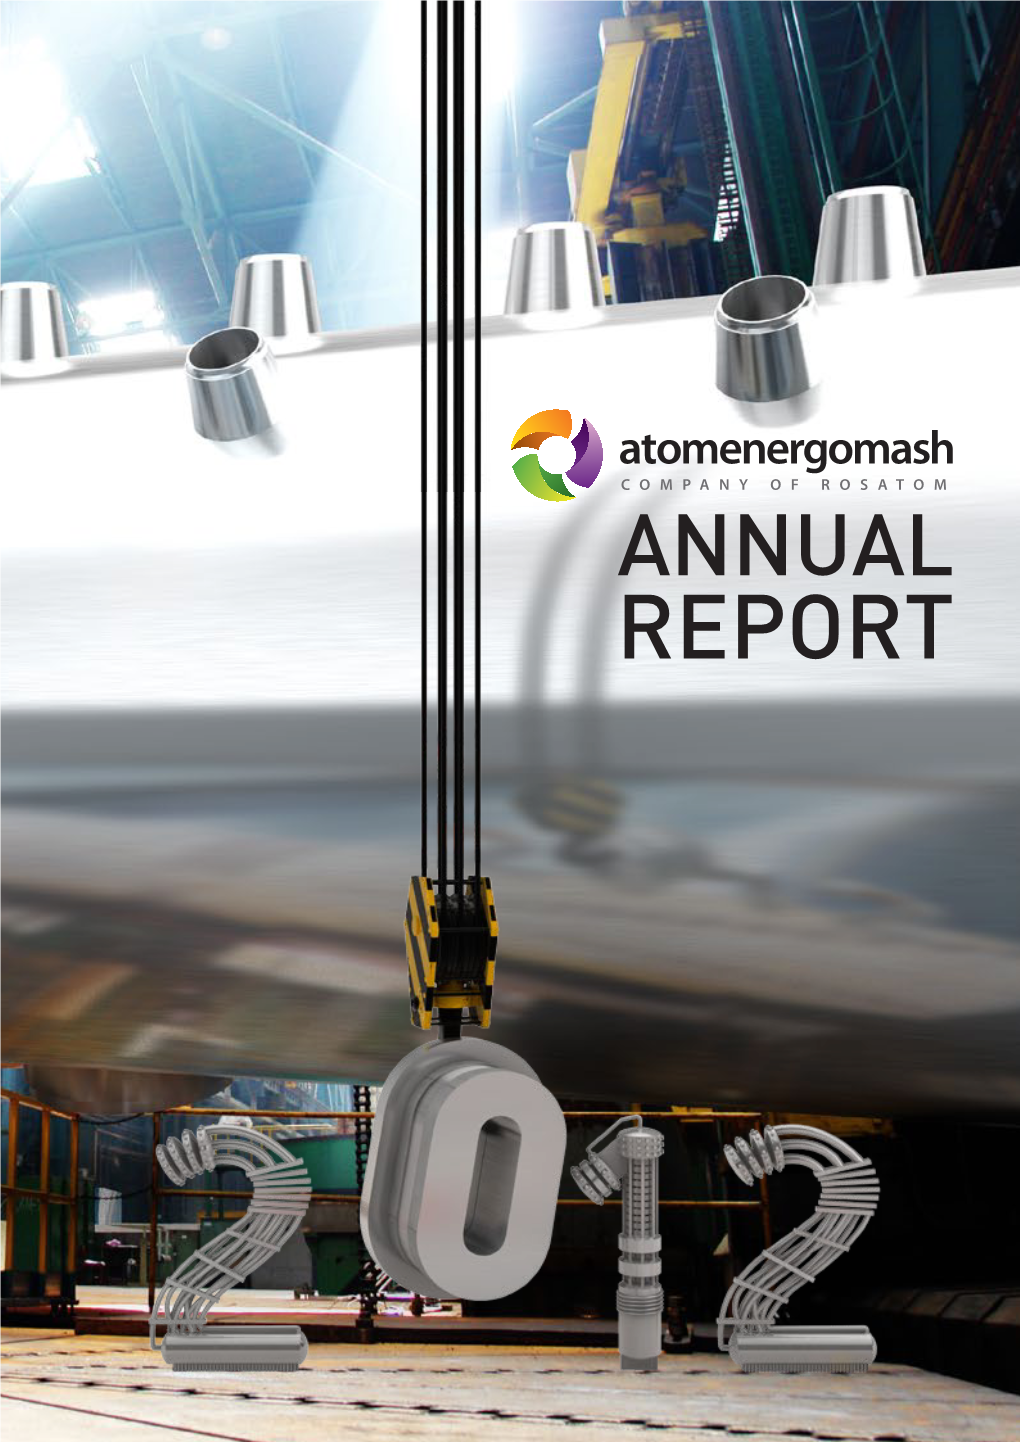 Annual Report 2012 Section 2011 2012 Information About Report Thermal Power 1 2,307 4,914 Equipment